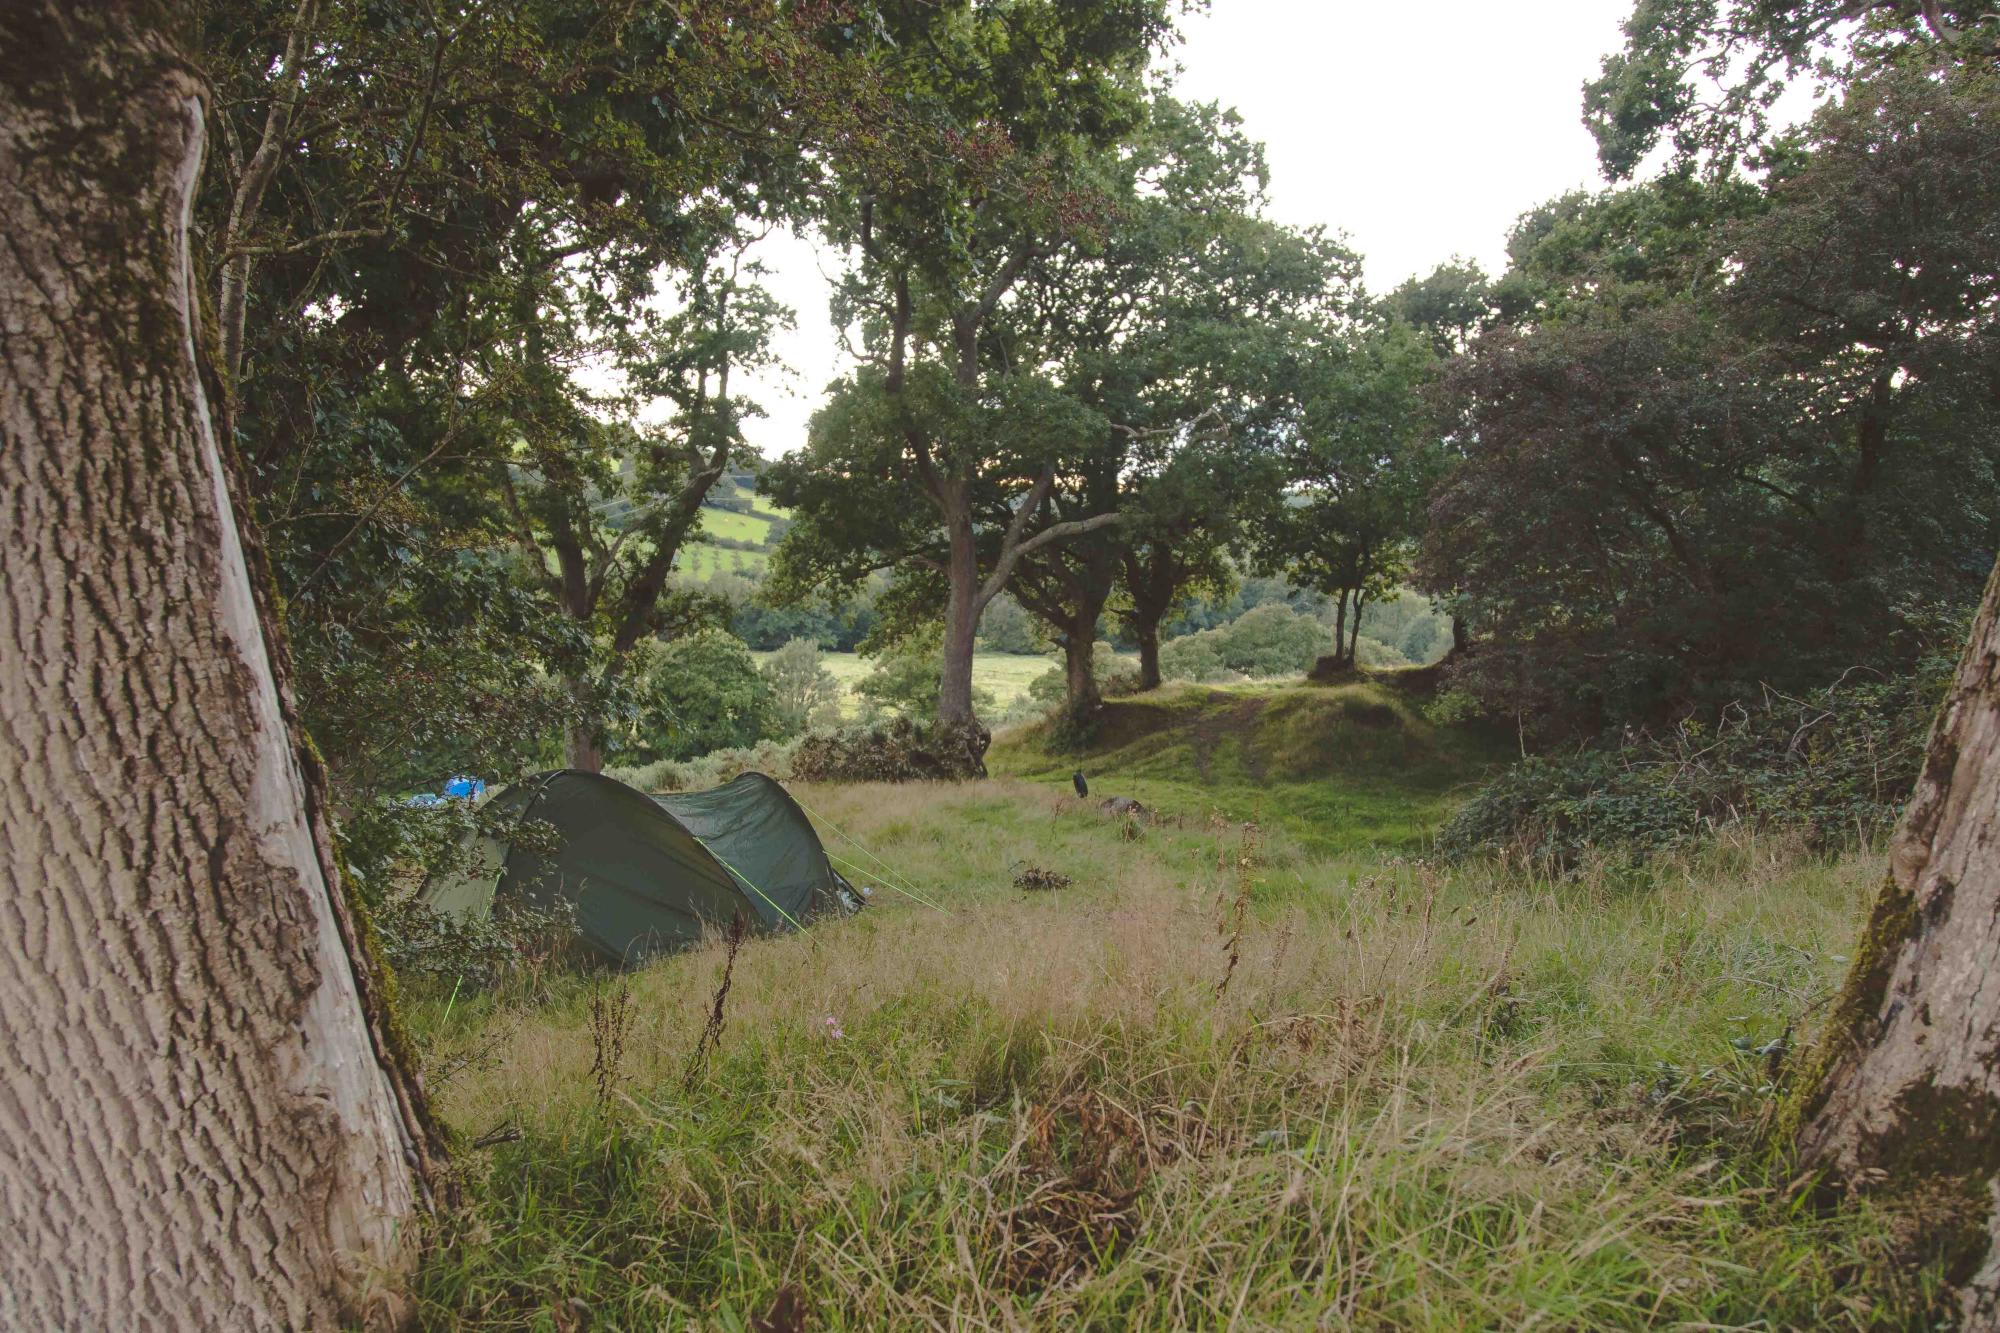 Bush Farm Campsite offers wild-ish camping in south Cornwall.